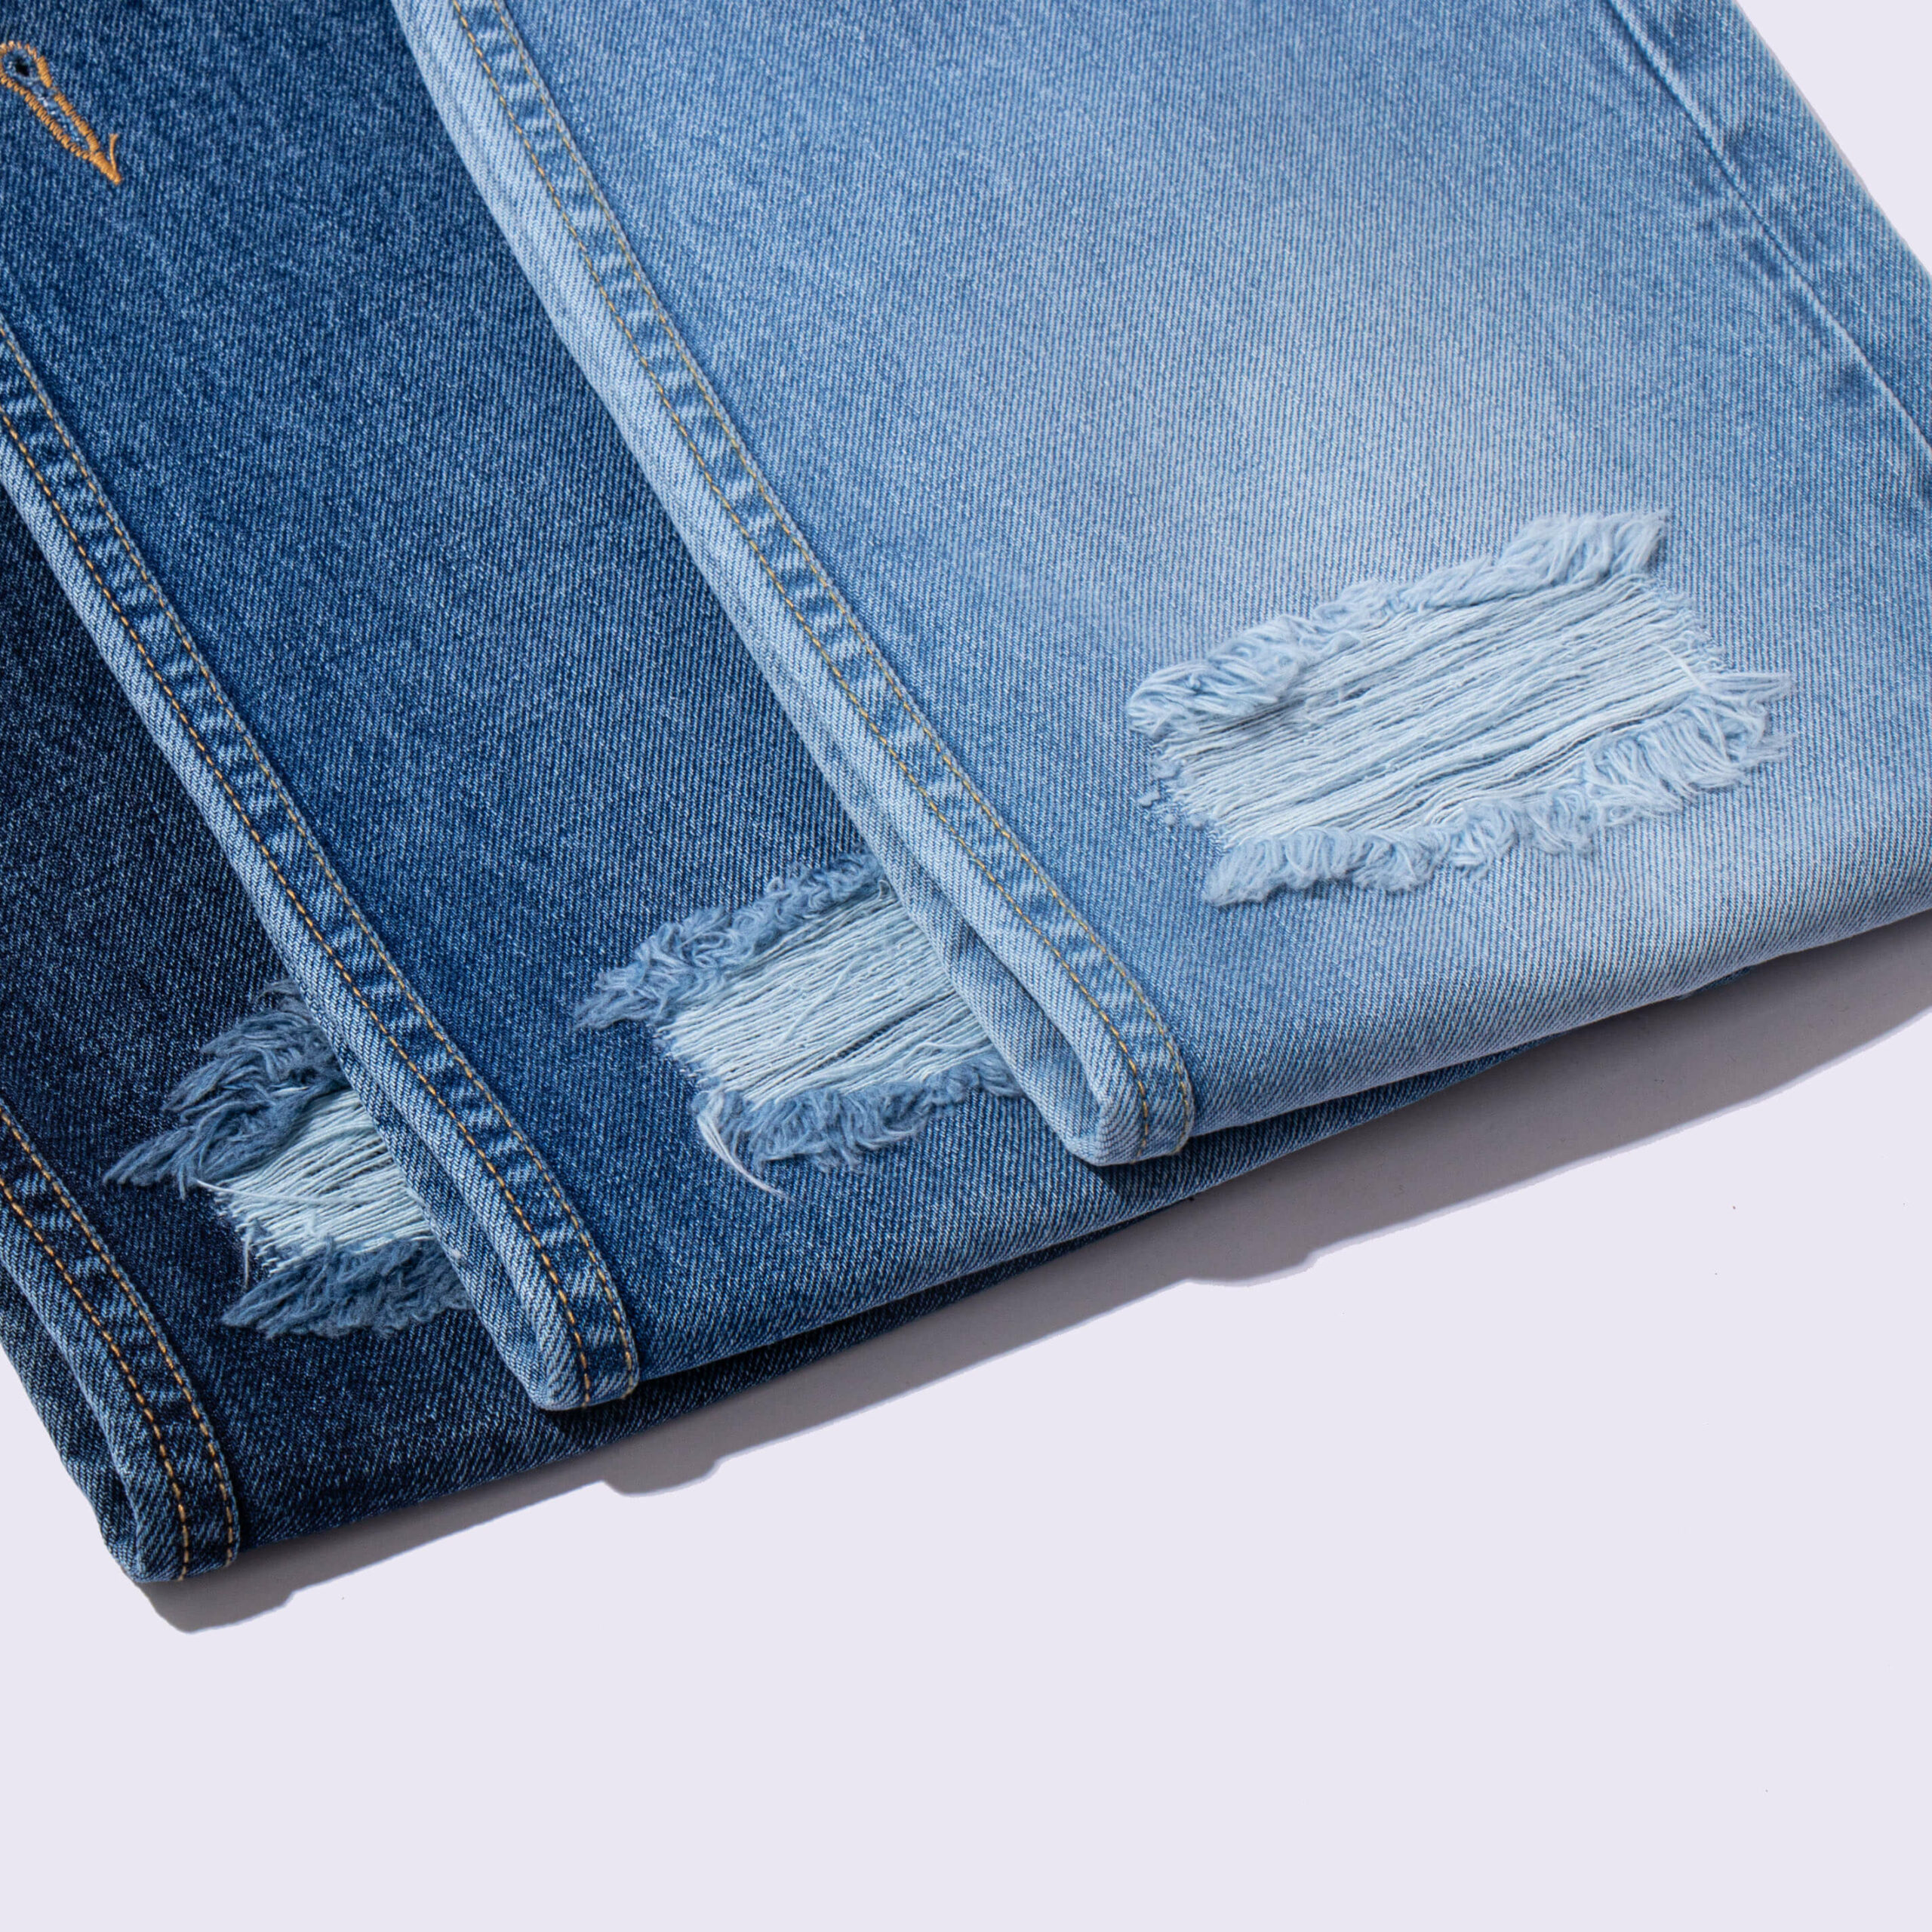 Sustainable Cotton Jeans Make Debut, Thanks to Primark! - Perfect Sourcing  — Latest Fashion, Apparel, Textile and Technology News